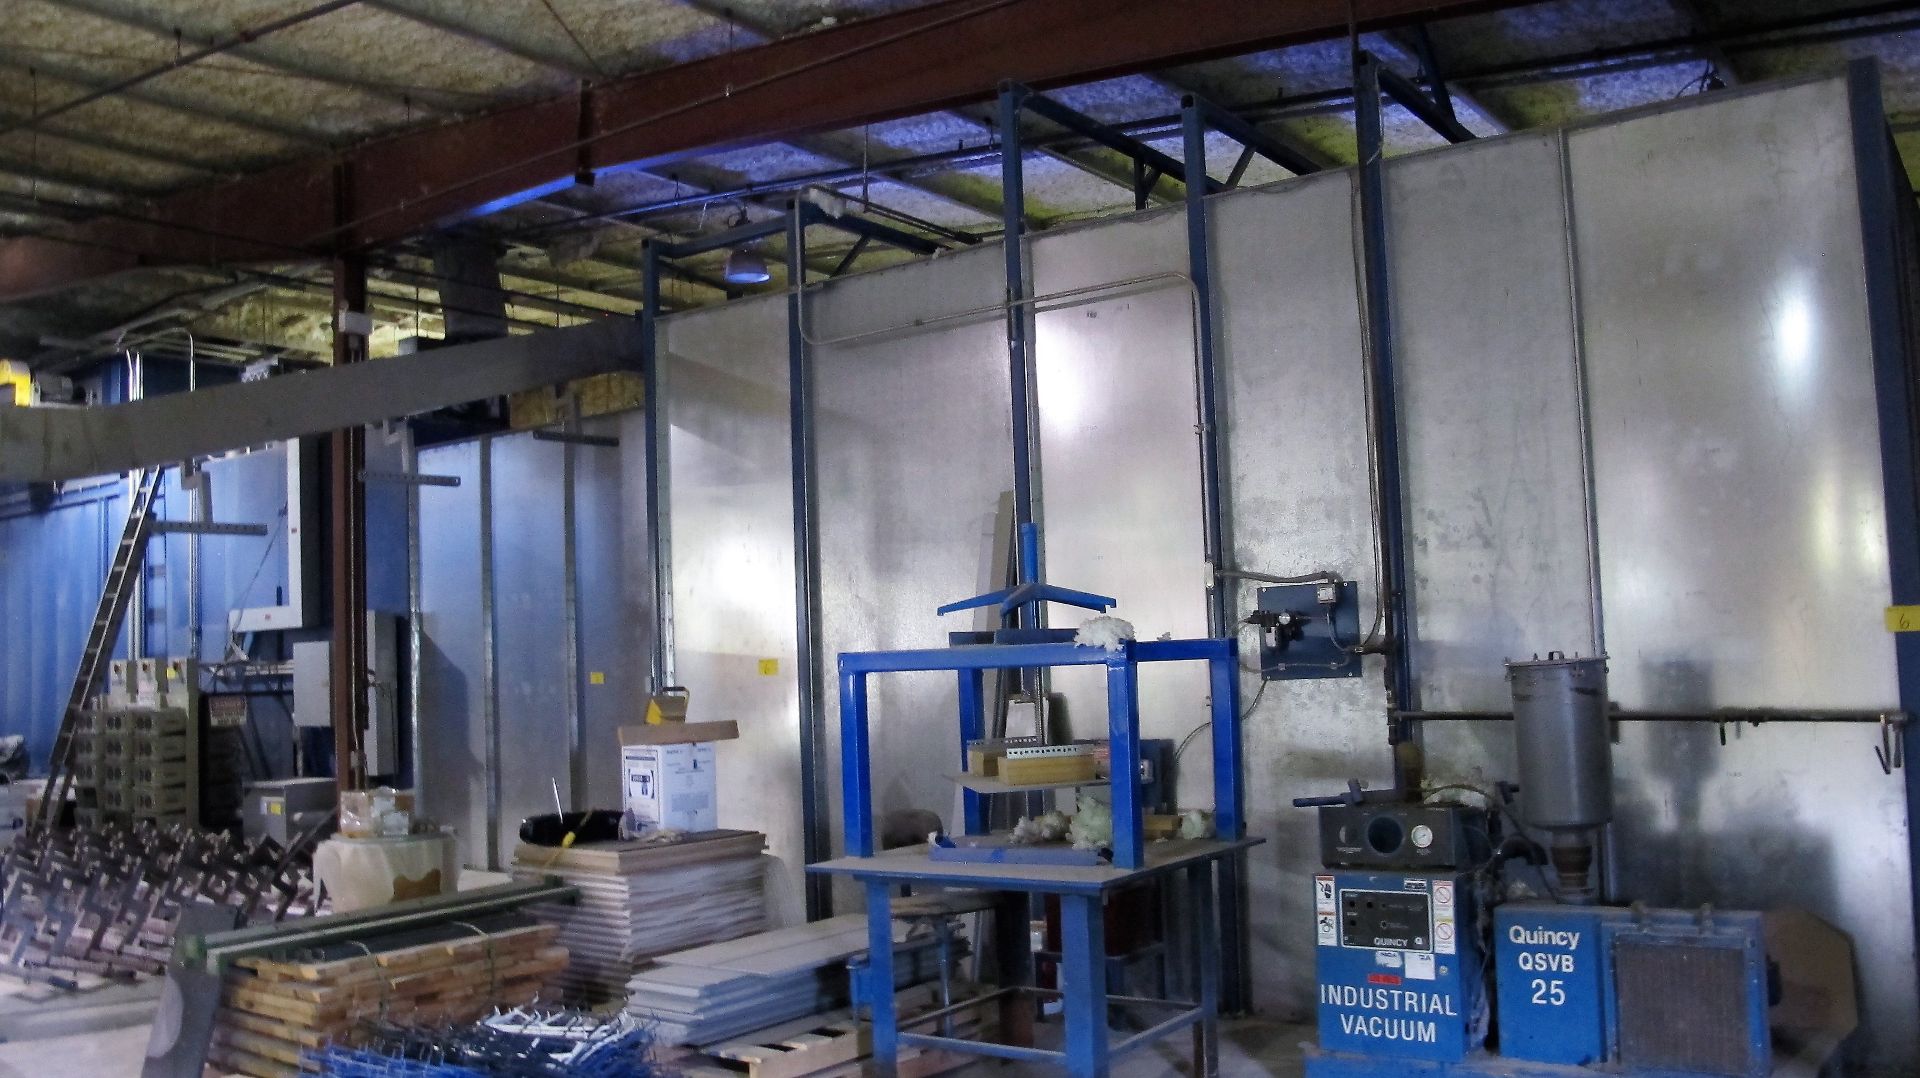 EN-BLOC POWDER COATING PAINT LINE & OVEN SYSTEM CONSISTING OF LOTS 2 THROUGH 7A (SUBJECT TO - Image 55 of 79